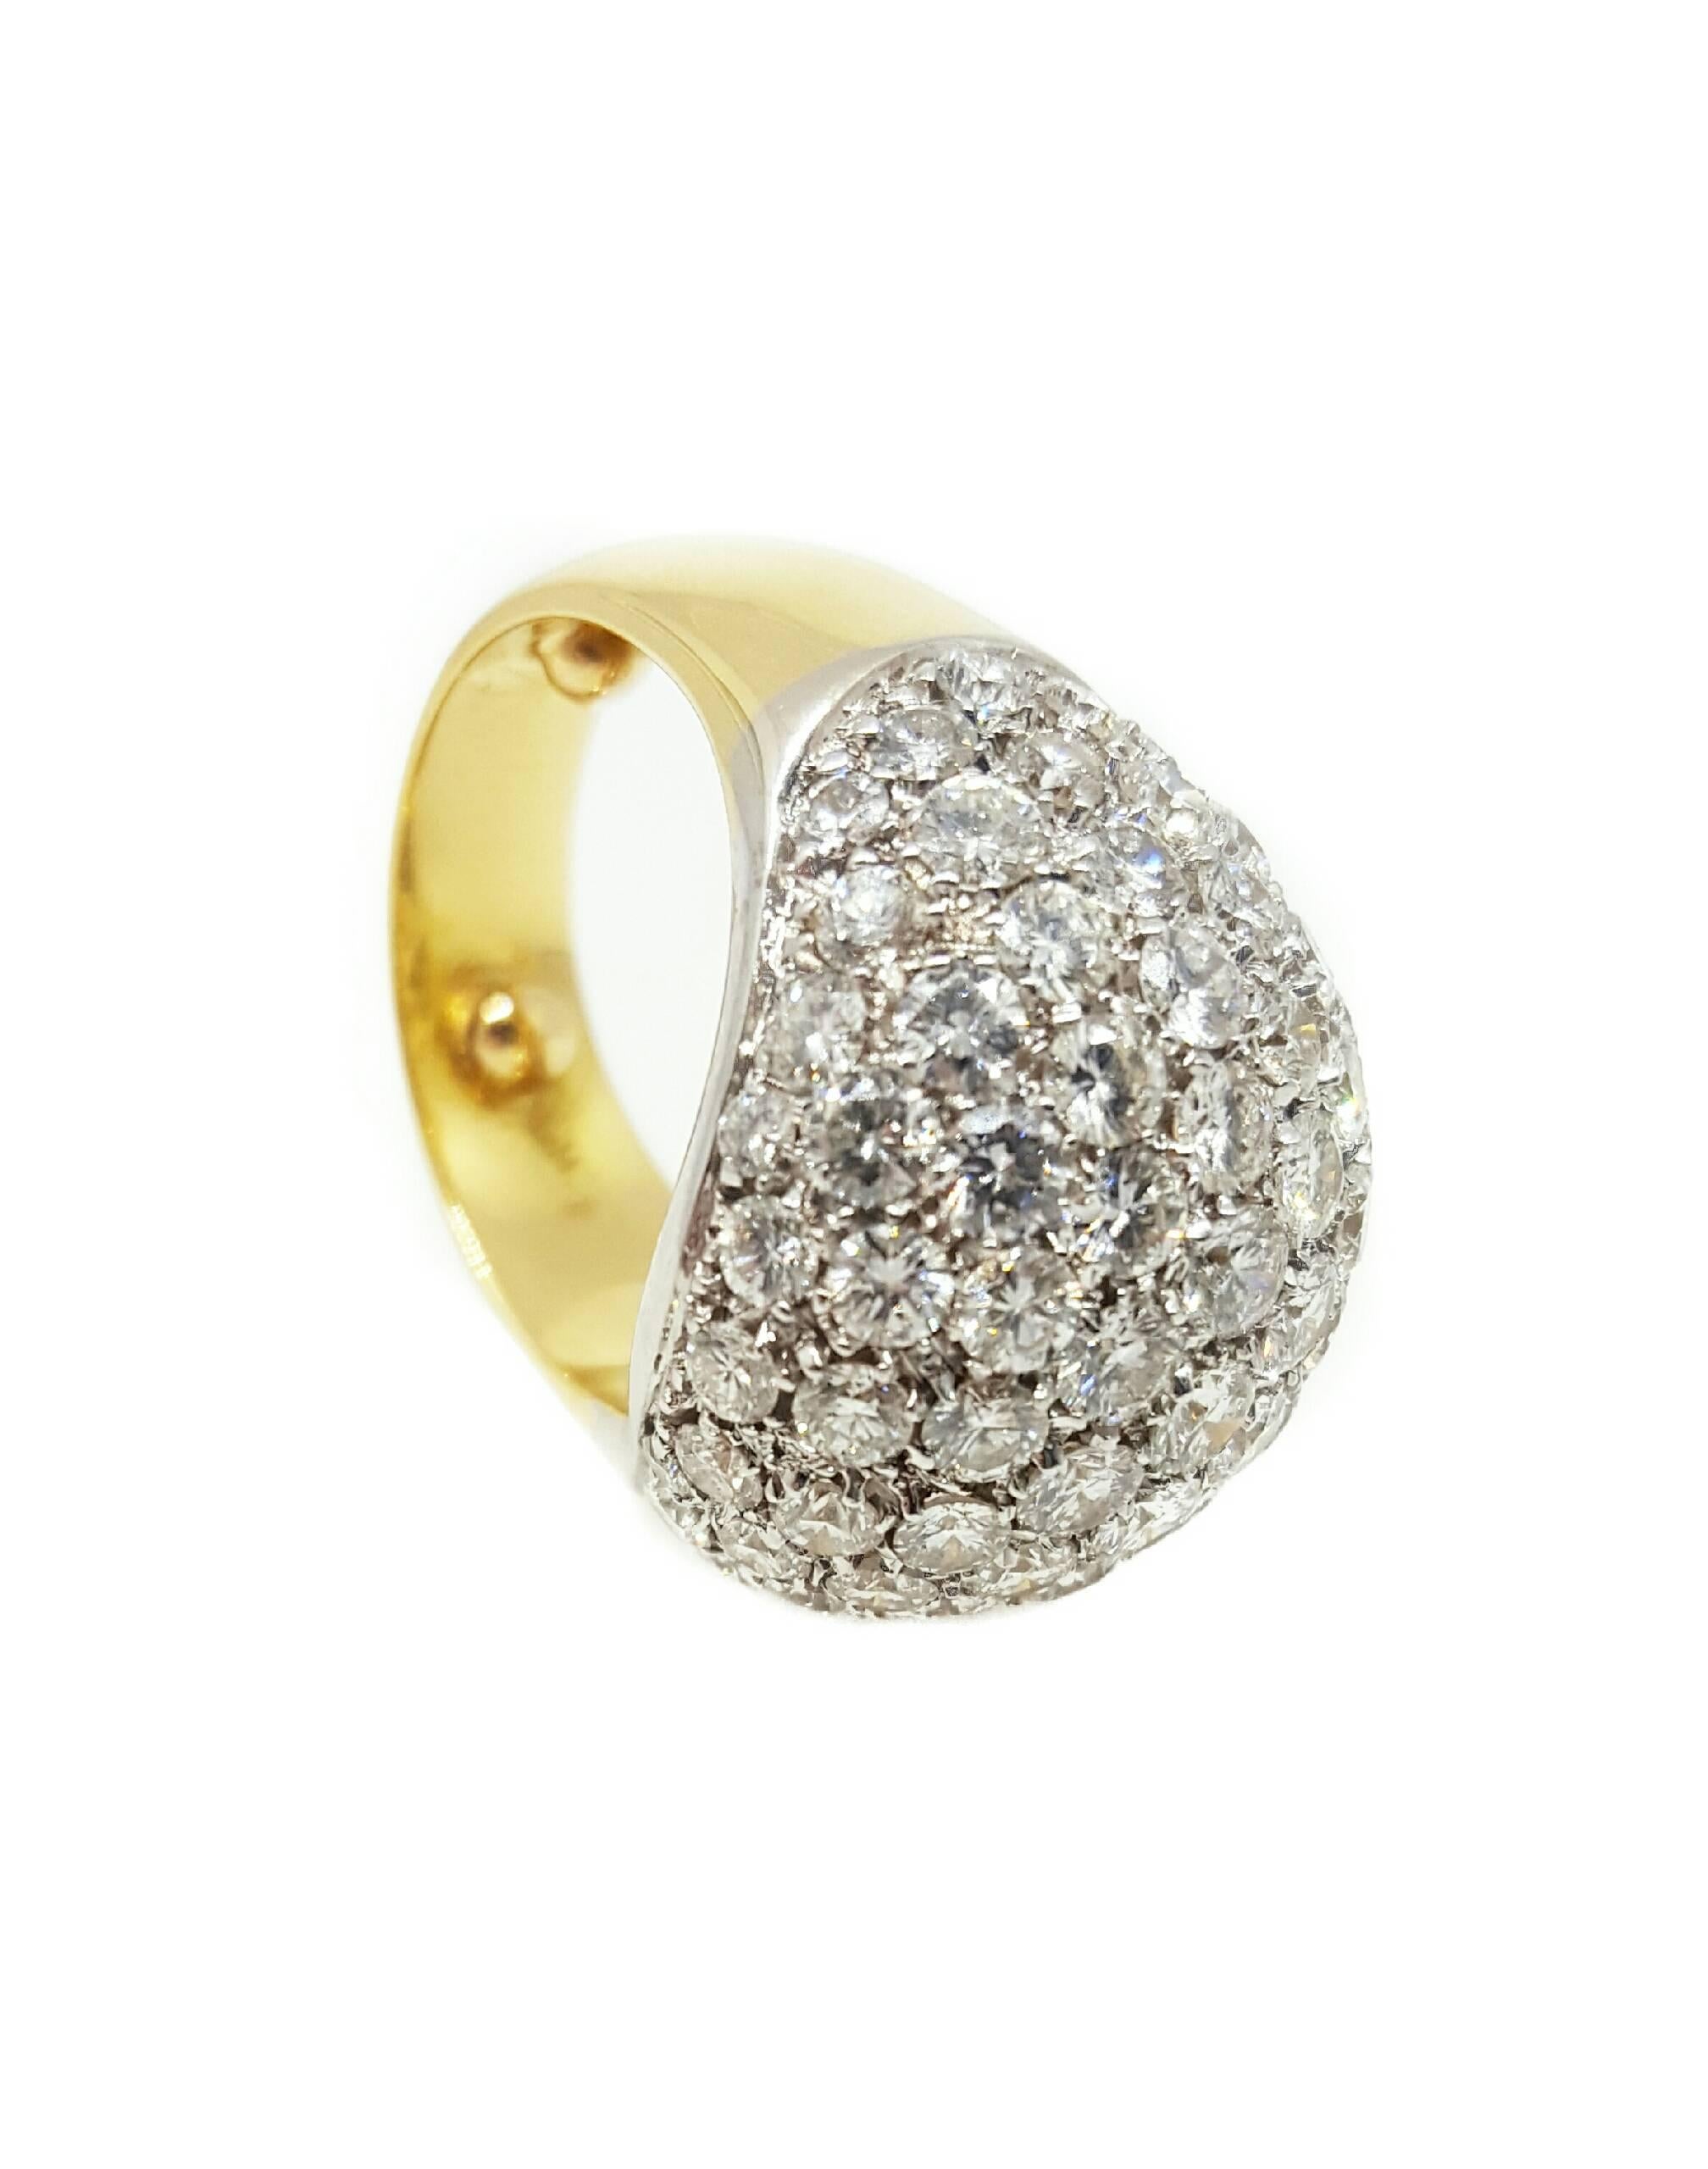 A stunning pave set ring set with 83 Round brilliant cut diamonds. The diamonds, totaling approximately 5.00 carats total weight, are G to H color and VS2 clarity. The ring was beautifully made from both 18 karat white and yellow gold. The head,